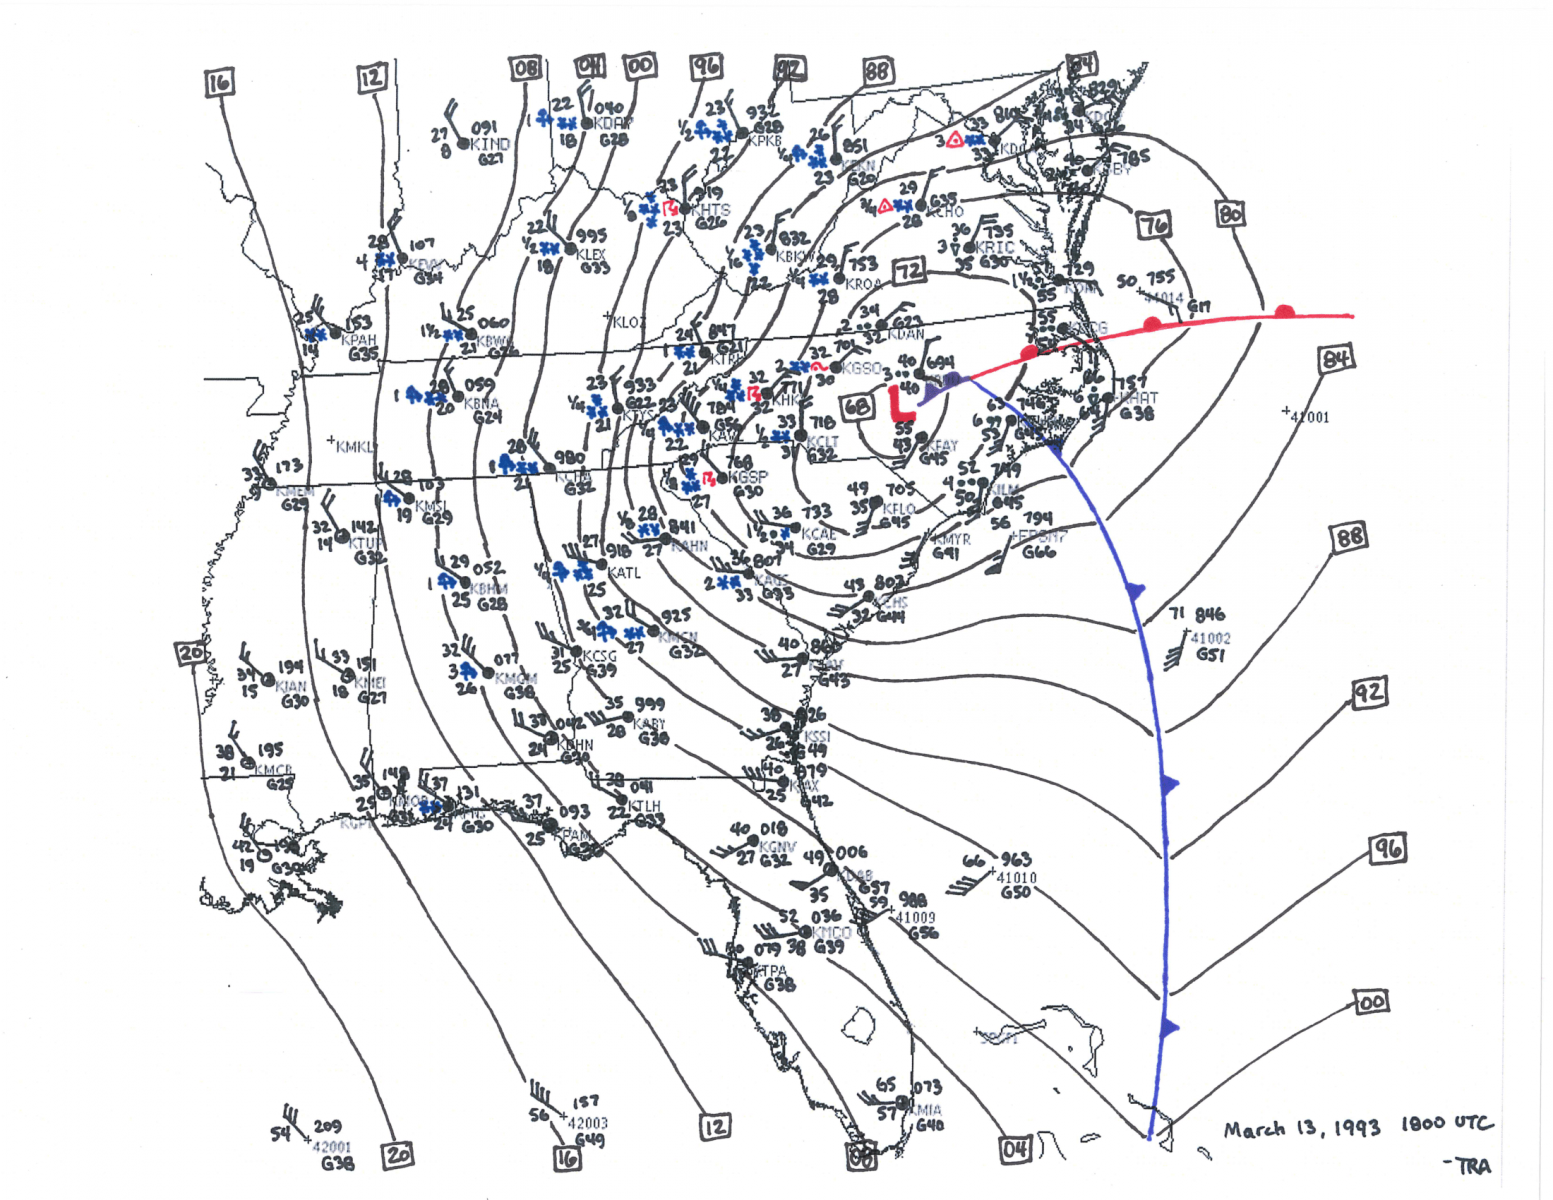 1993 Storm of the Century Surface Analysis at 1 PM March 13, 1993